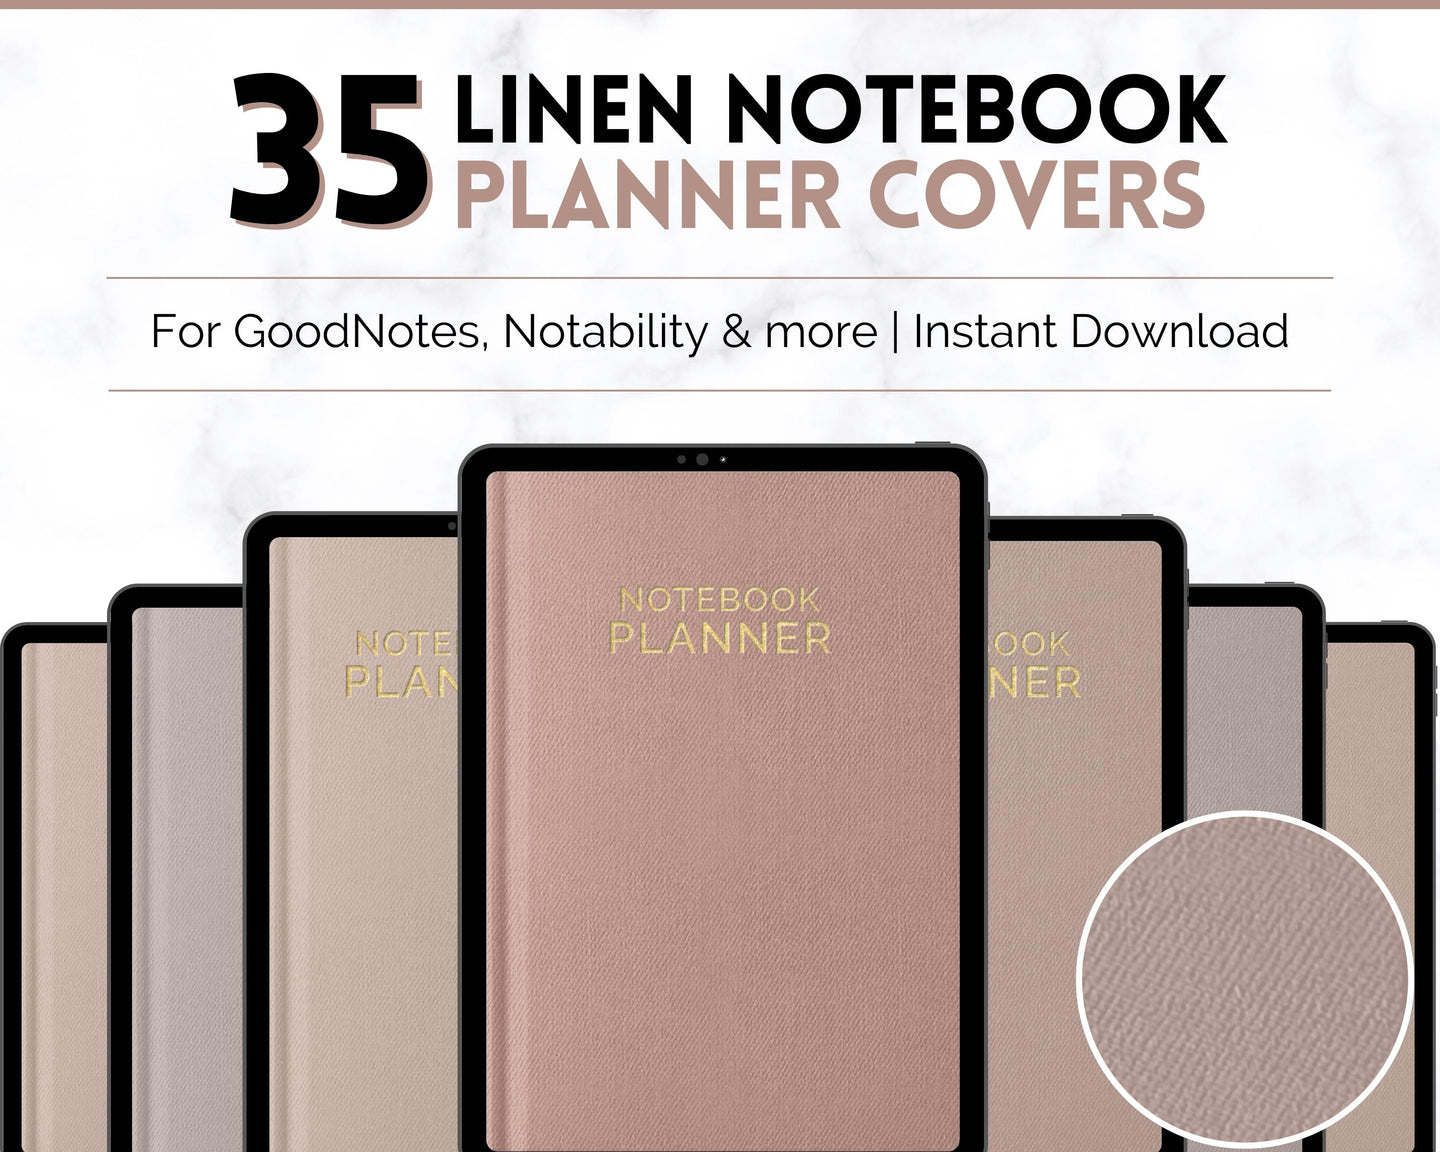 35 Digital Planner Notebook Covers | Digital Journal Covers for GoodNotes & iPad | Linen Texture Brown